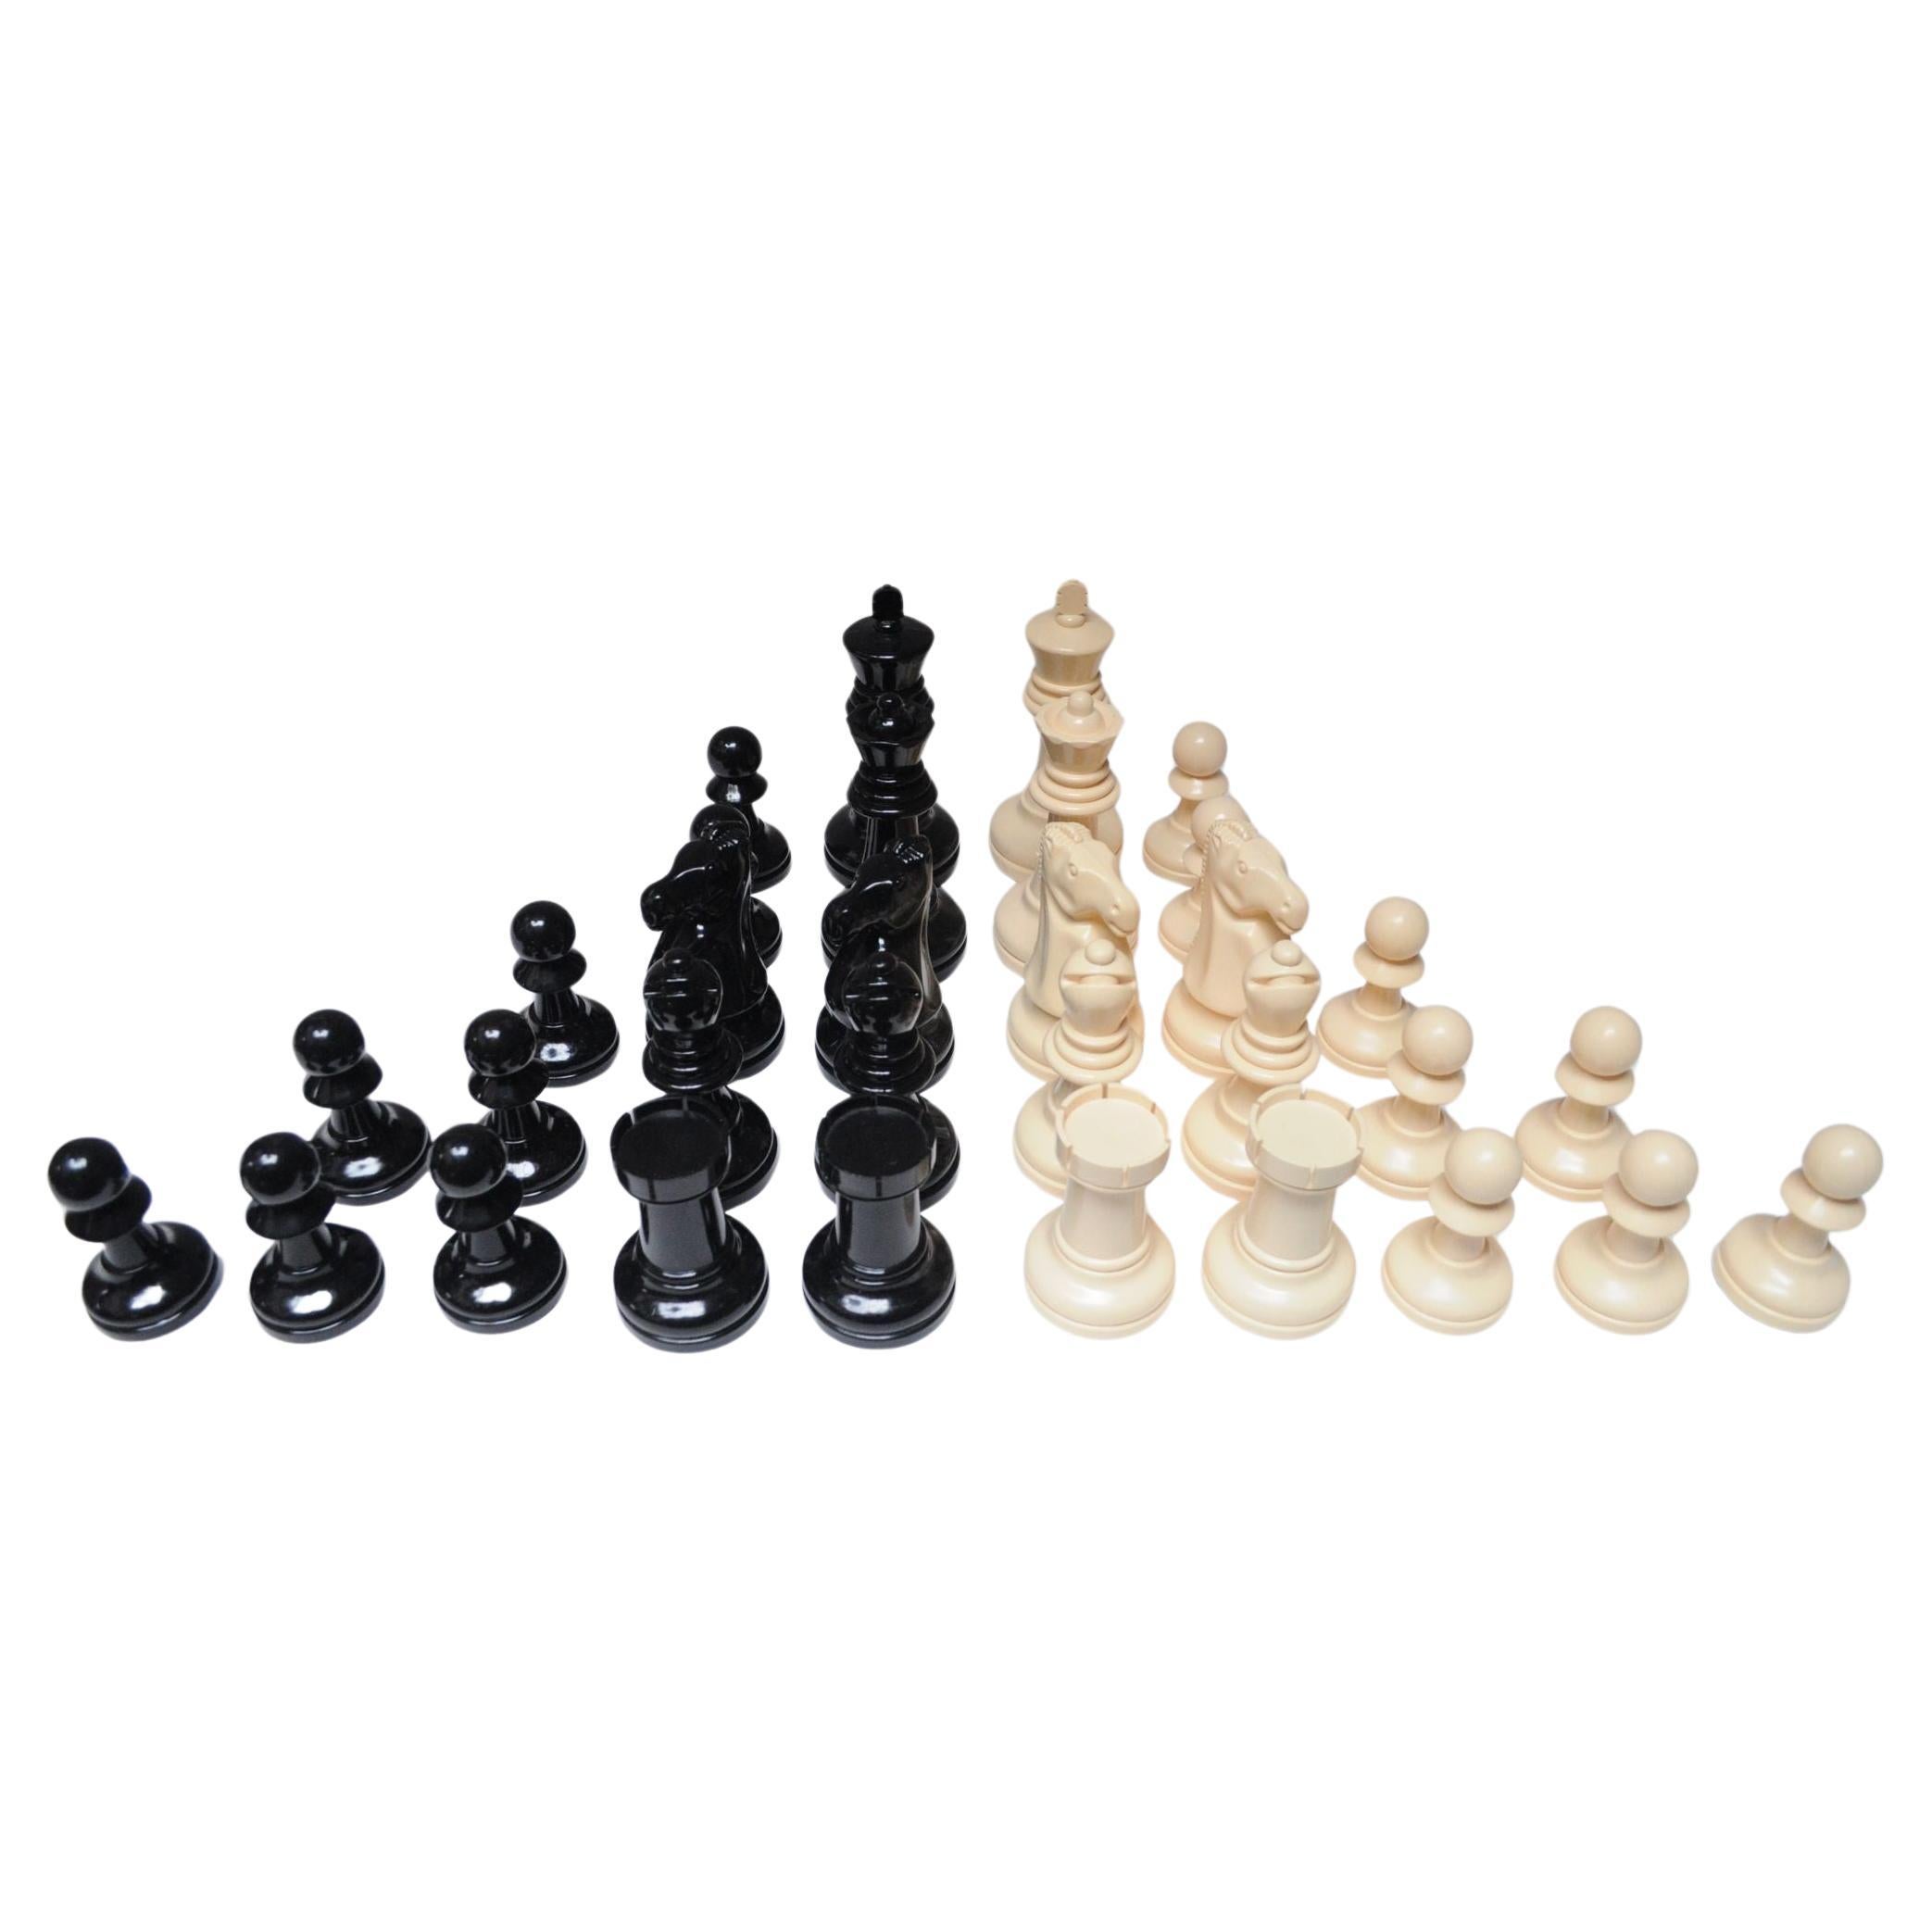 Complete Set of Vintage Oversized Chess Pieces in Black and Cream Plastic For Sale